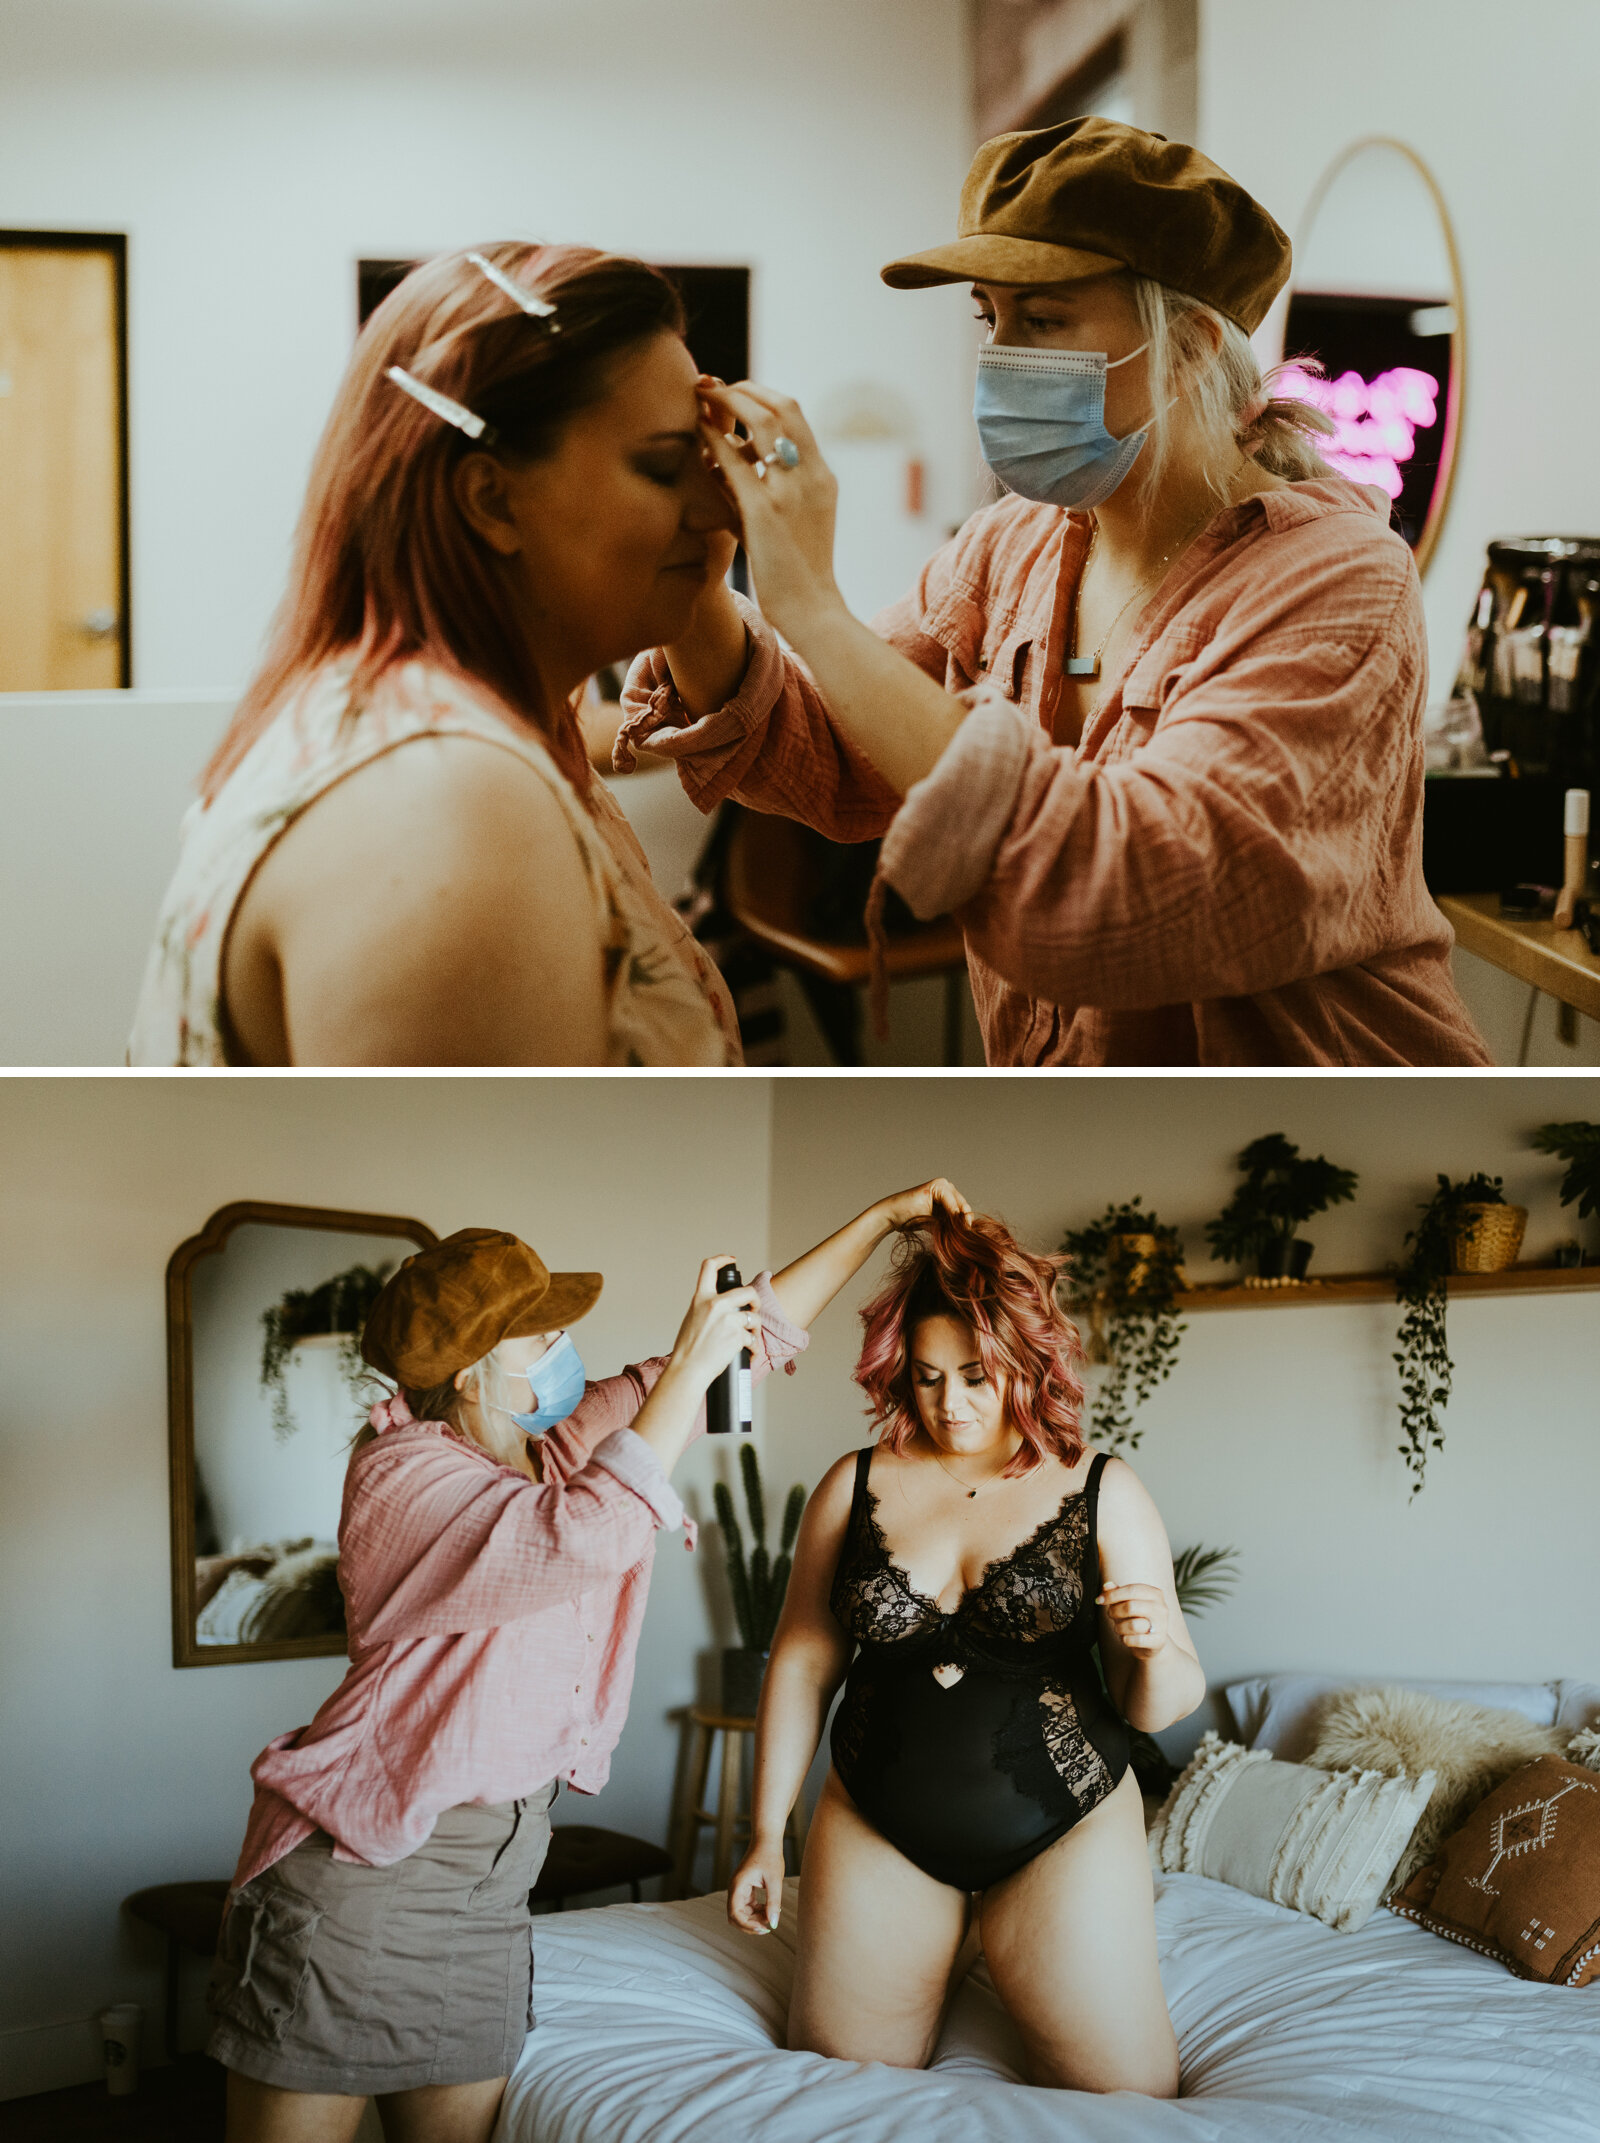 Getting ready photos of the traveling salon by frankely photoghraphy. Getting ready for a boudoir photoshoot. .jpg